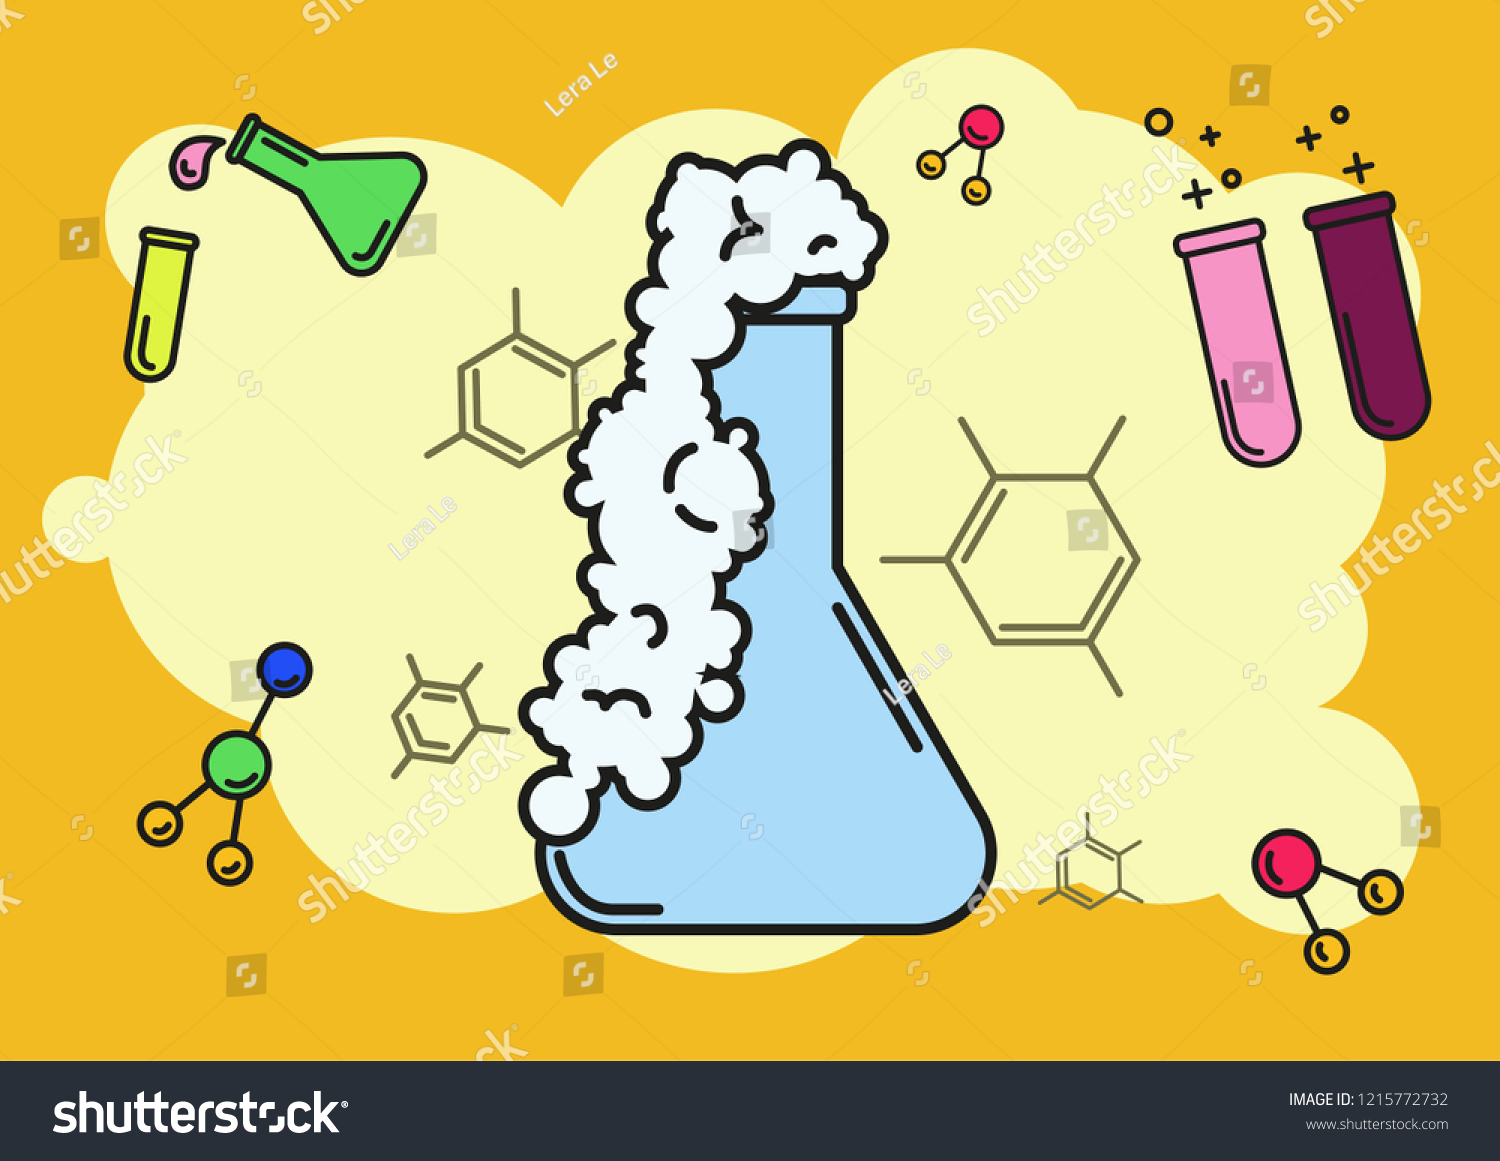 Download Flasks Chemical Reactions Atoms On Yellow Stock Vector Royalty Free 1215772732 PSD Mockup Templates